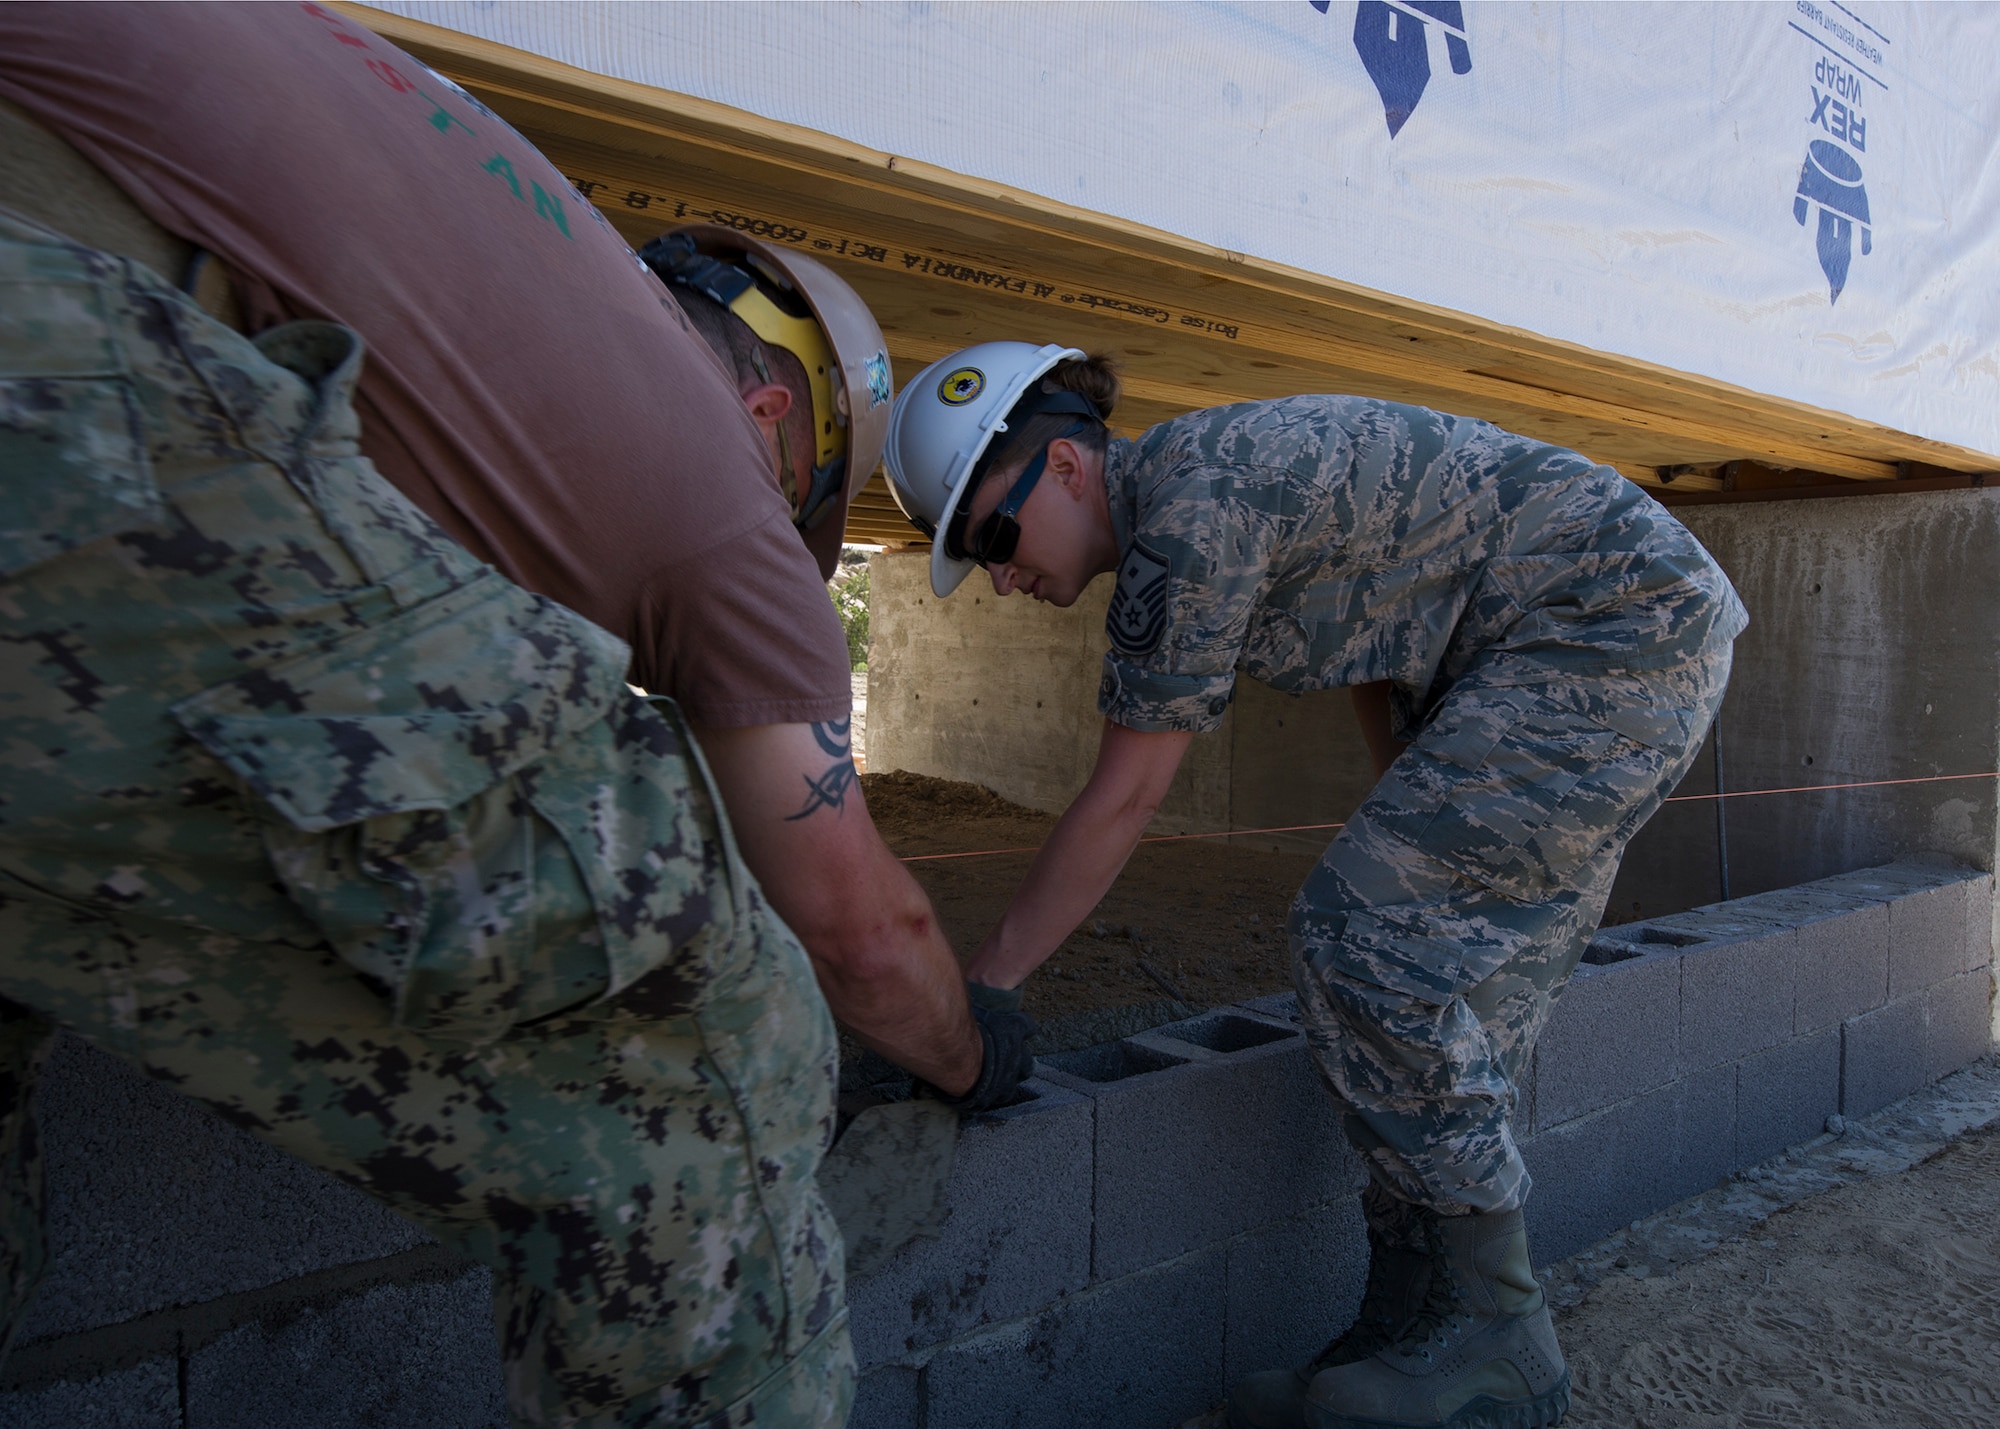 Builder 1st Class Carl Phillips, Naval Mobile Construction Battalion 22, teaches Master Sgt. Elizabeth Clark, 446th Civil Engineer Squadron 1st sergeant, how to set bricks for the foundation of a newly constructed house in Gallup, NM, June 13, 2016. Airmen and Navy Seabee’s participated in Operation Footprint, a partnership of the Southwest Indian Foundation and the Department of Defense’s Innovative Readiness Training program which provides an avenue for training military members .The two-week joint service training allowed members to construct homes which will be given to tribal members of the Navajo Nation who are in need. (U.S. Air Force Reserve photo by Tech. Sgt. Bryan Hull)